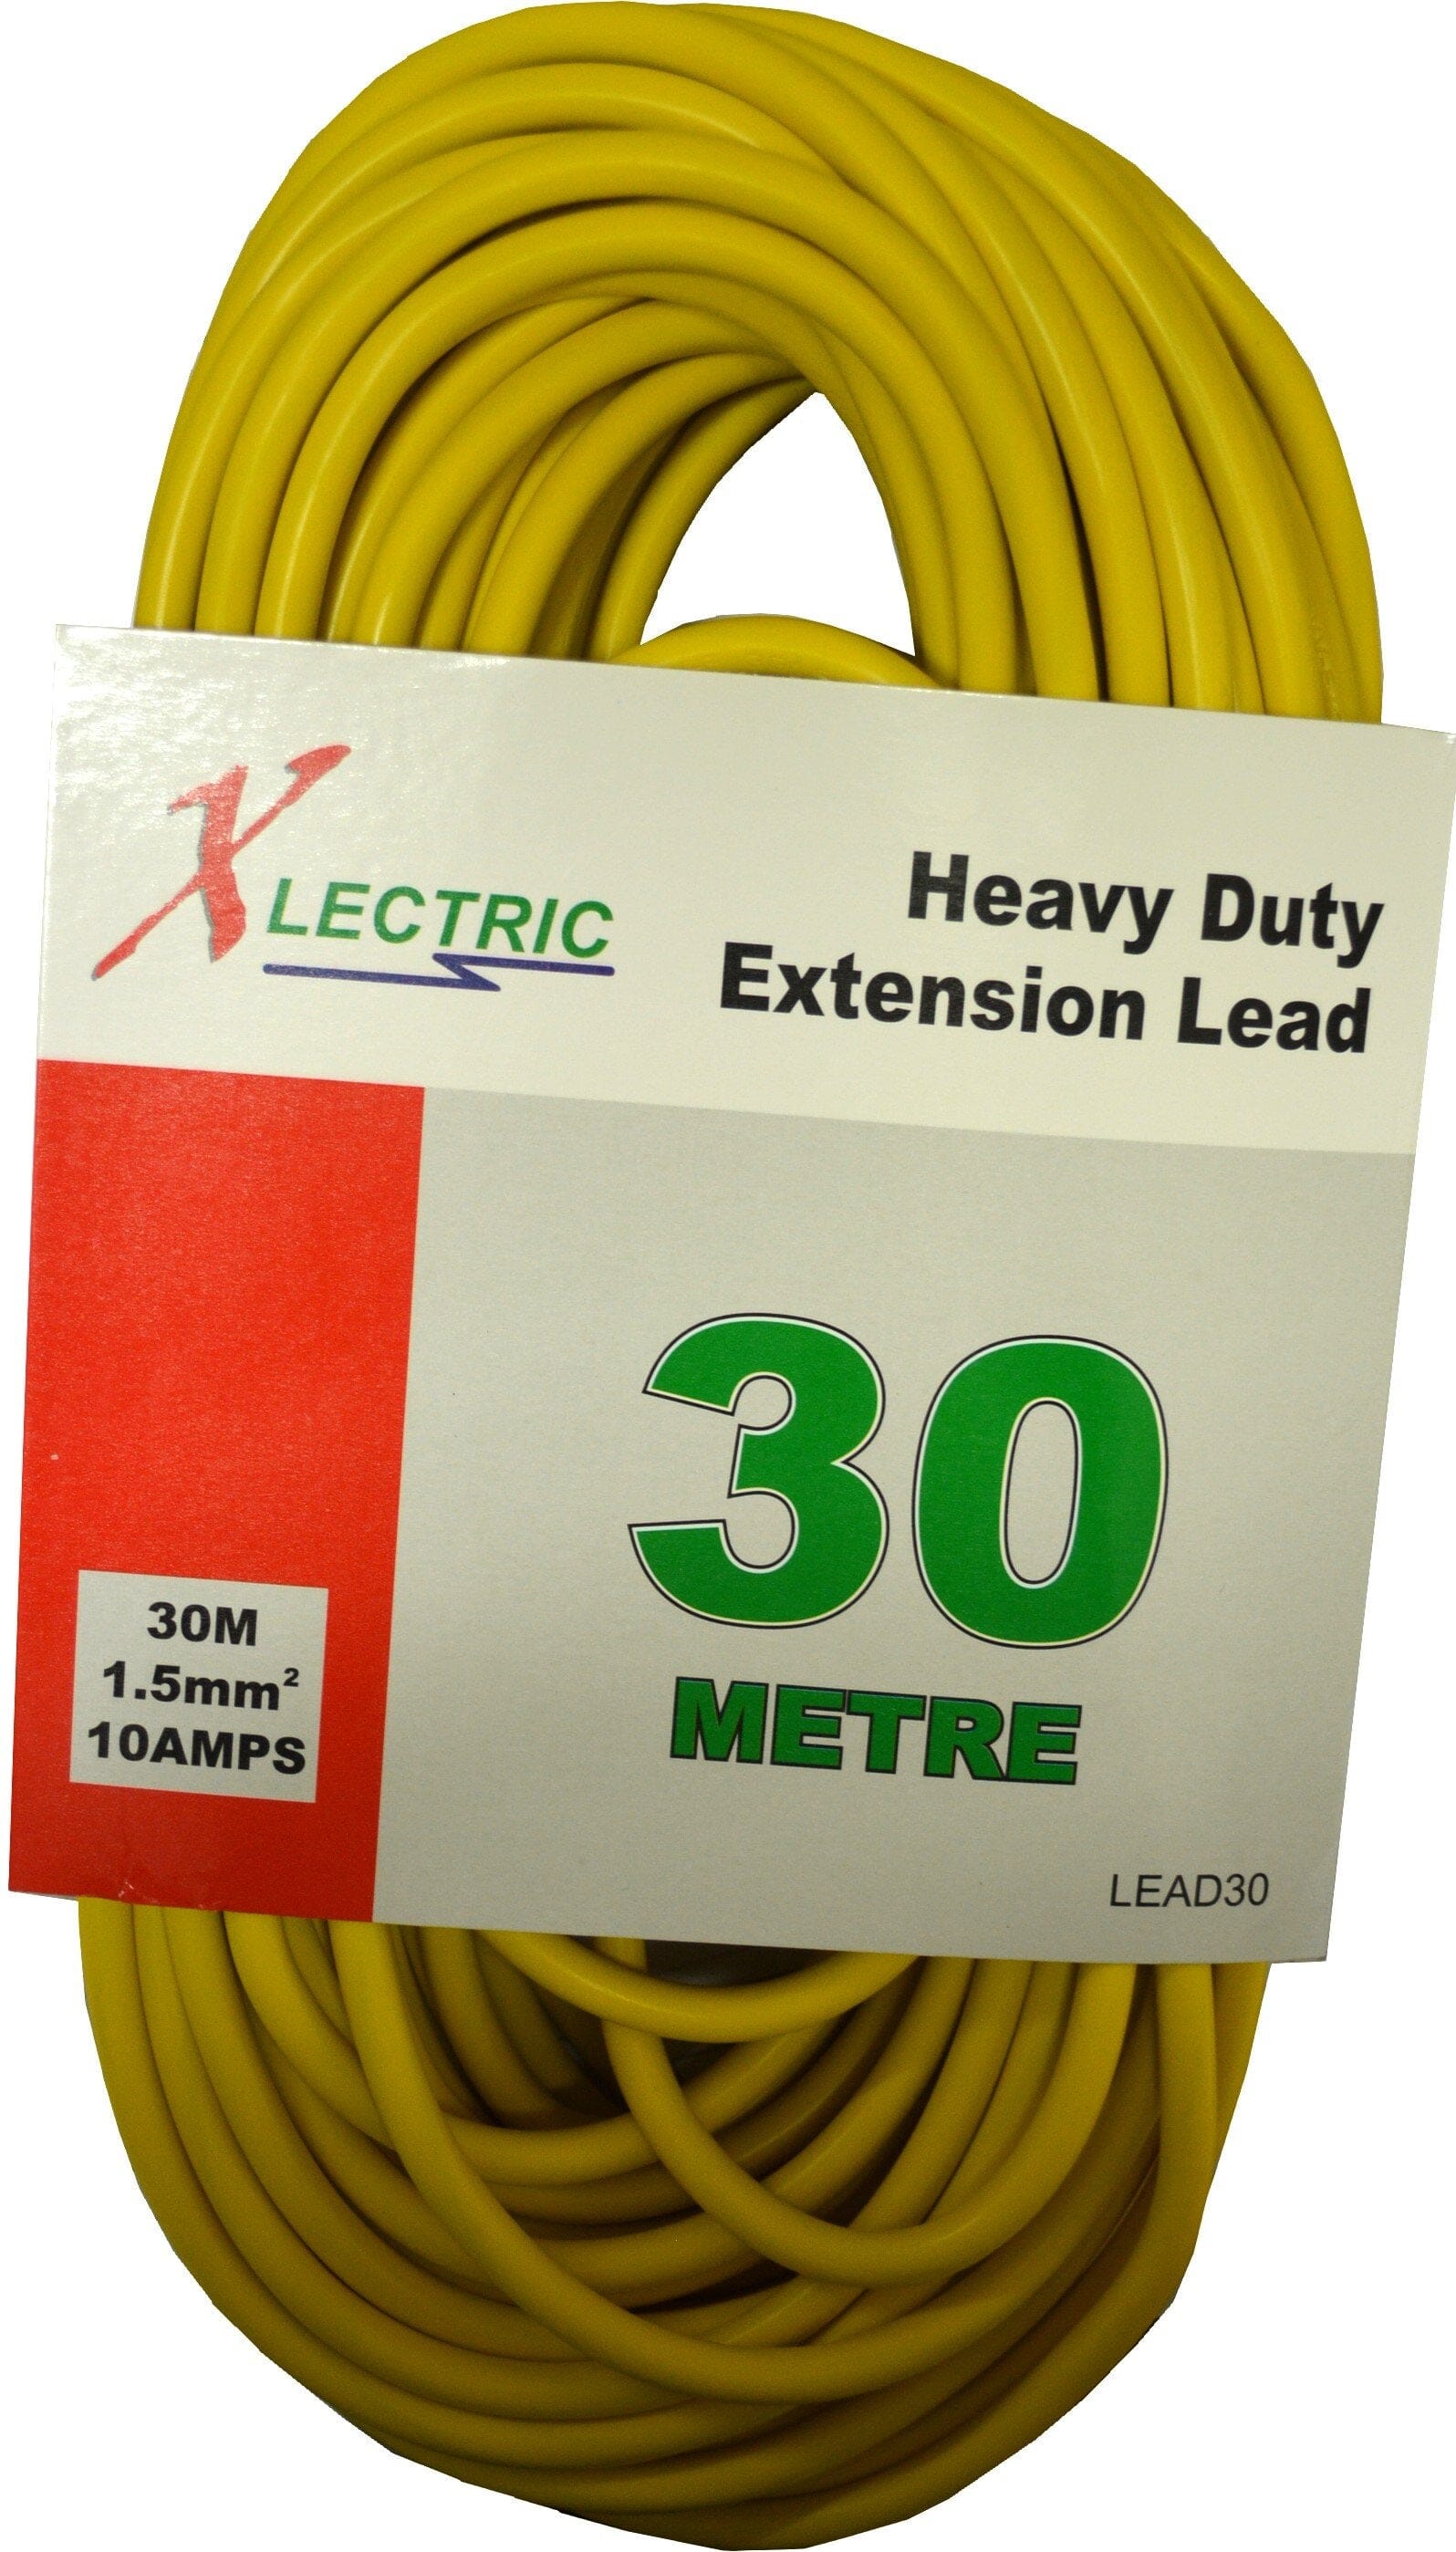 Xlectric Extension Lead - Heavy Duty Yellow 30m